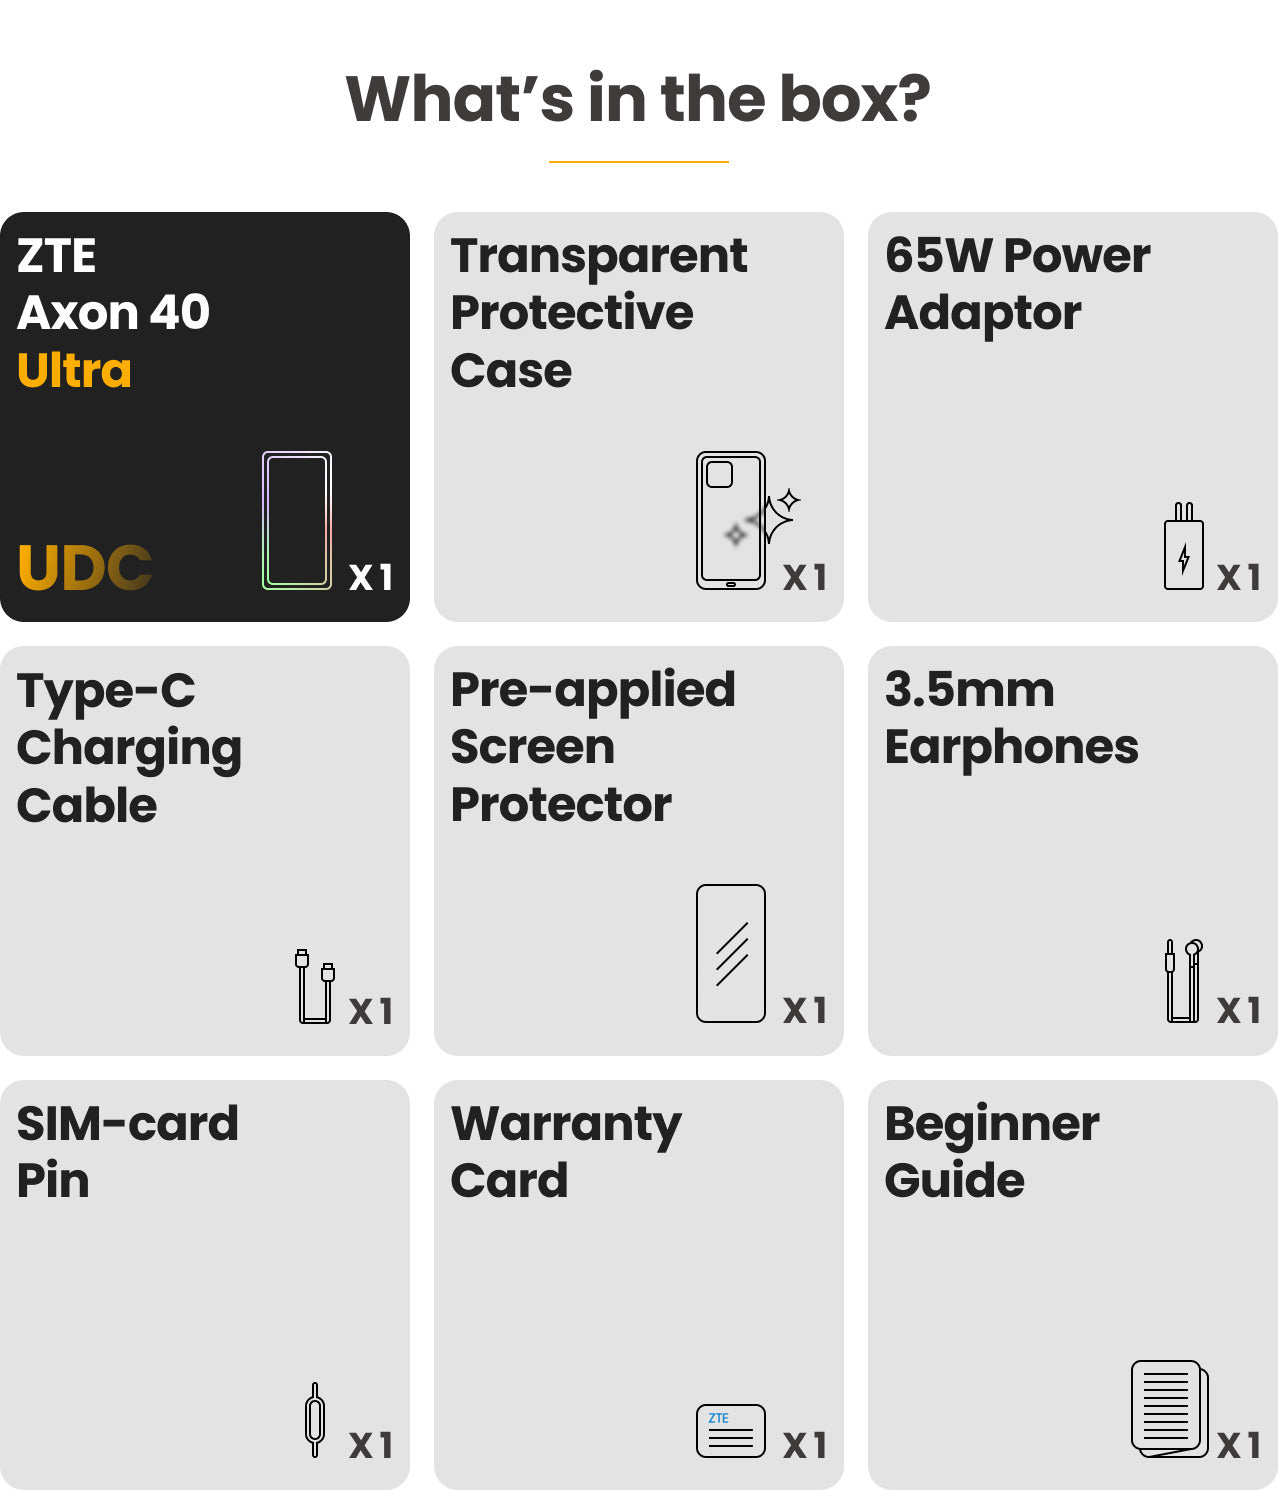 What’s in the box: 1/ One ZTE Axon 40 Ultra; 2/ One Transparent Protective Case; 3/One 65W Power Adaptor; 4/One Type-C Charging Cable; 5/ One Pre-applied Screen Protector; 6/ One 3.5mm Earphones; 7/ One SIM-card Pin; 8/ One Warranty Card; 9/ One Beginner Guide